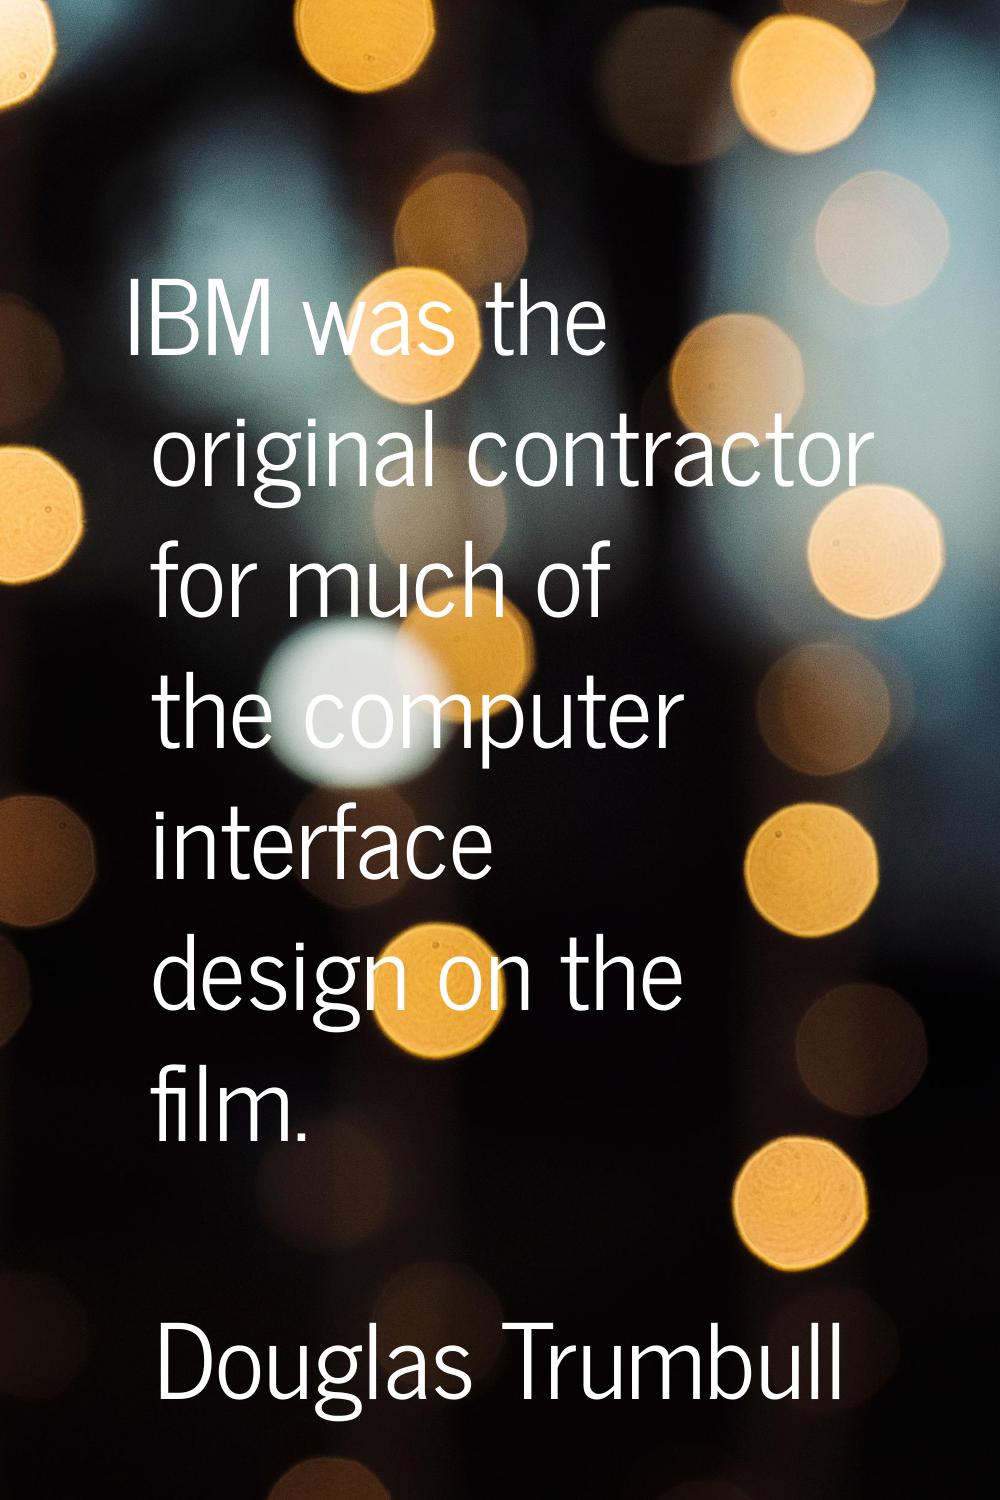 IBM was the original contractor for much of the computer interface design on the film.